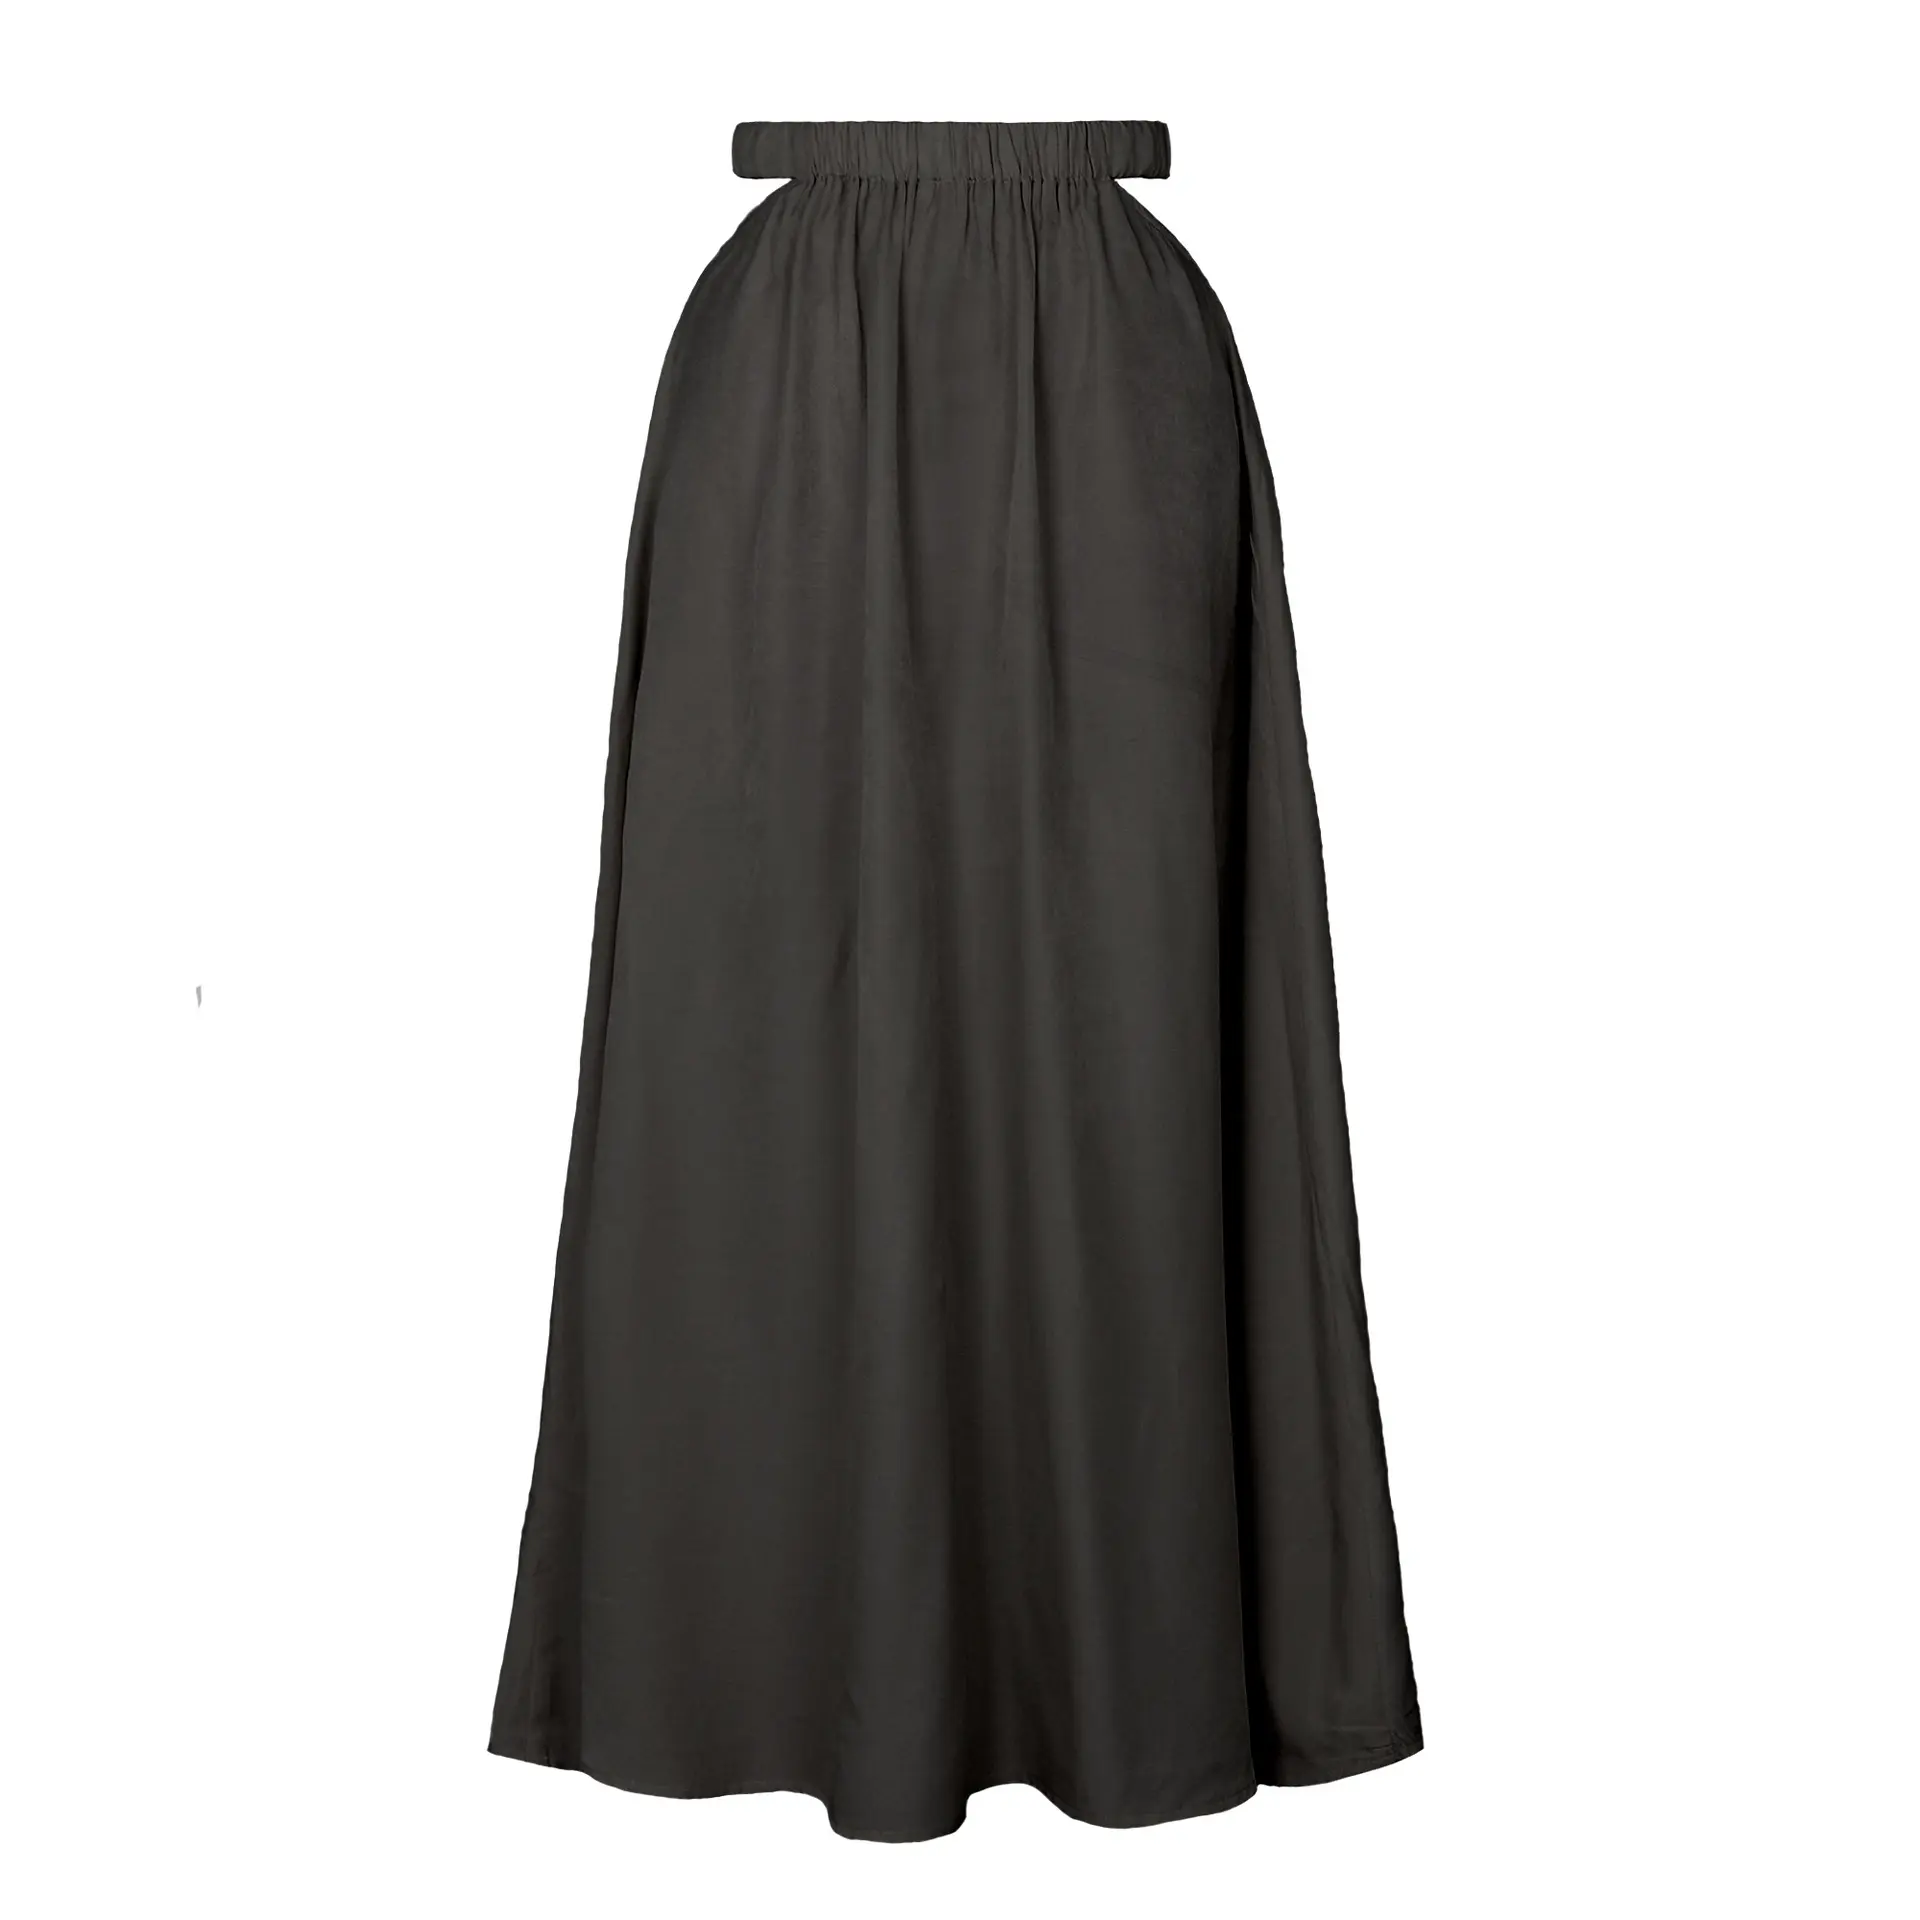 Amazon hot selling women's high-waisted hollowed out solid color half skirt long style Europe and the United States A-line skirt